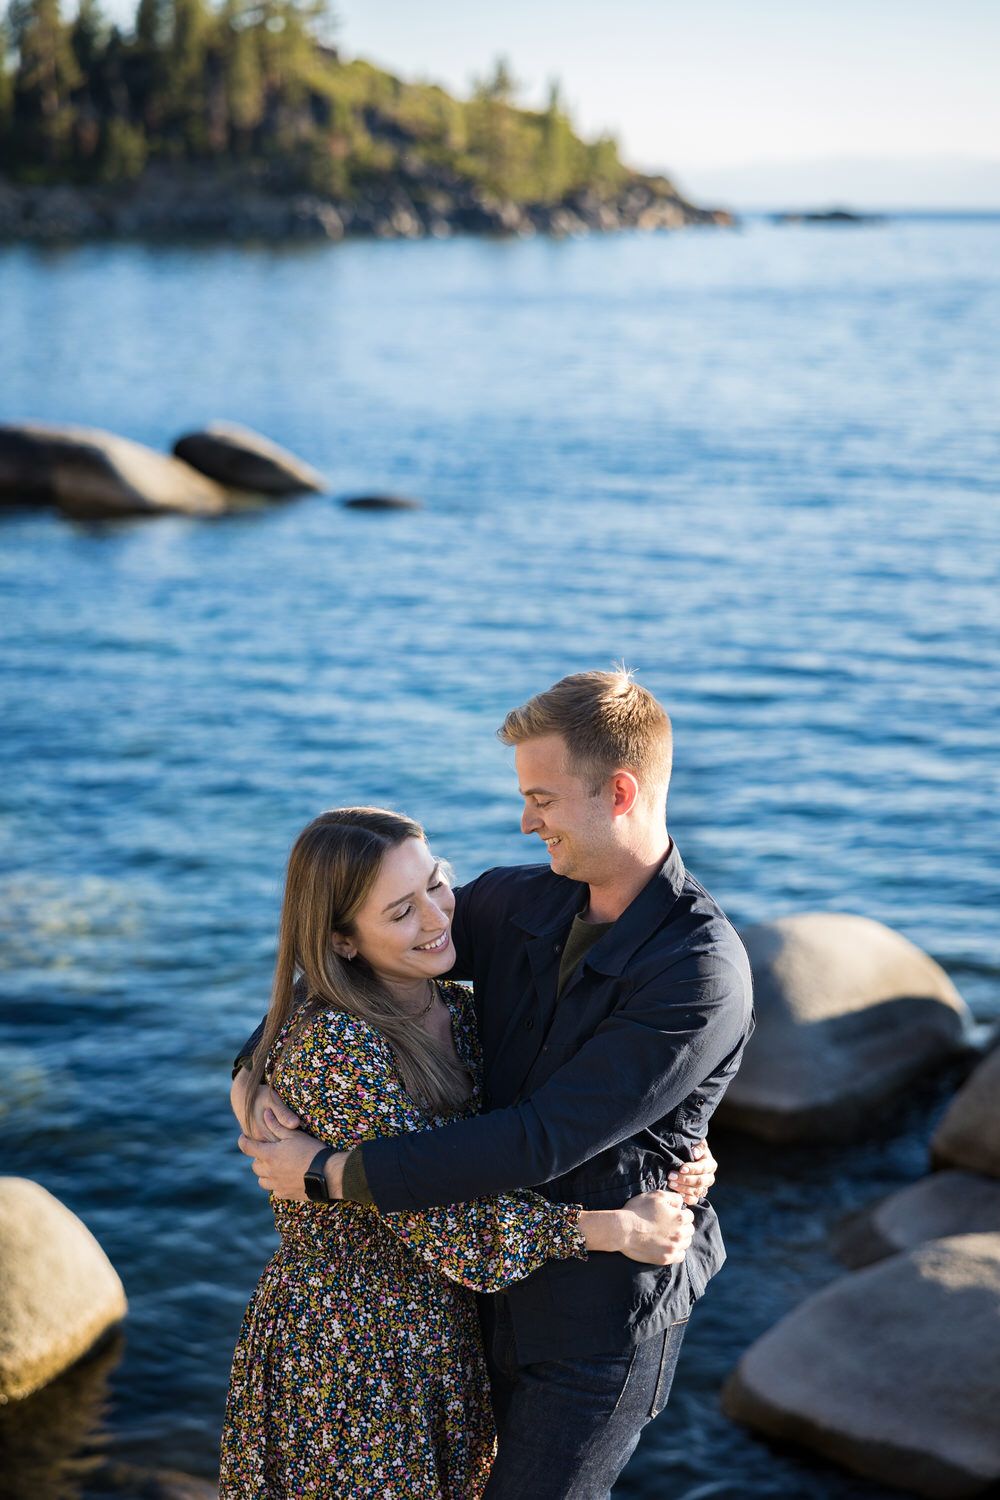 A couple enjoys a quiet, happy moment at their surprise proposal next to a lake.